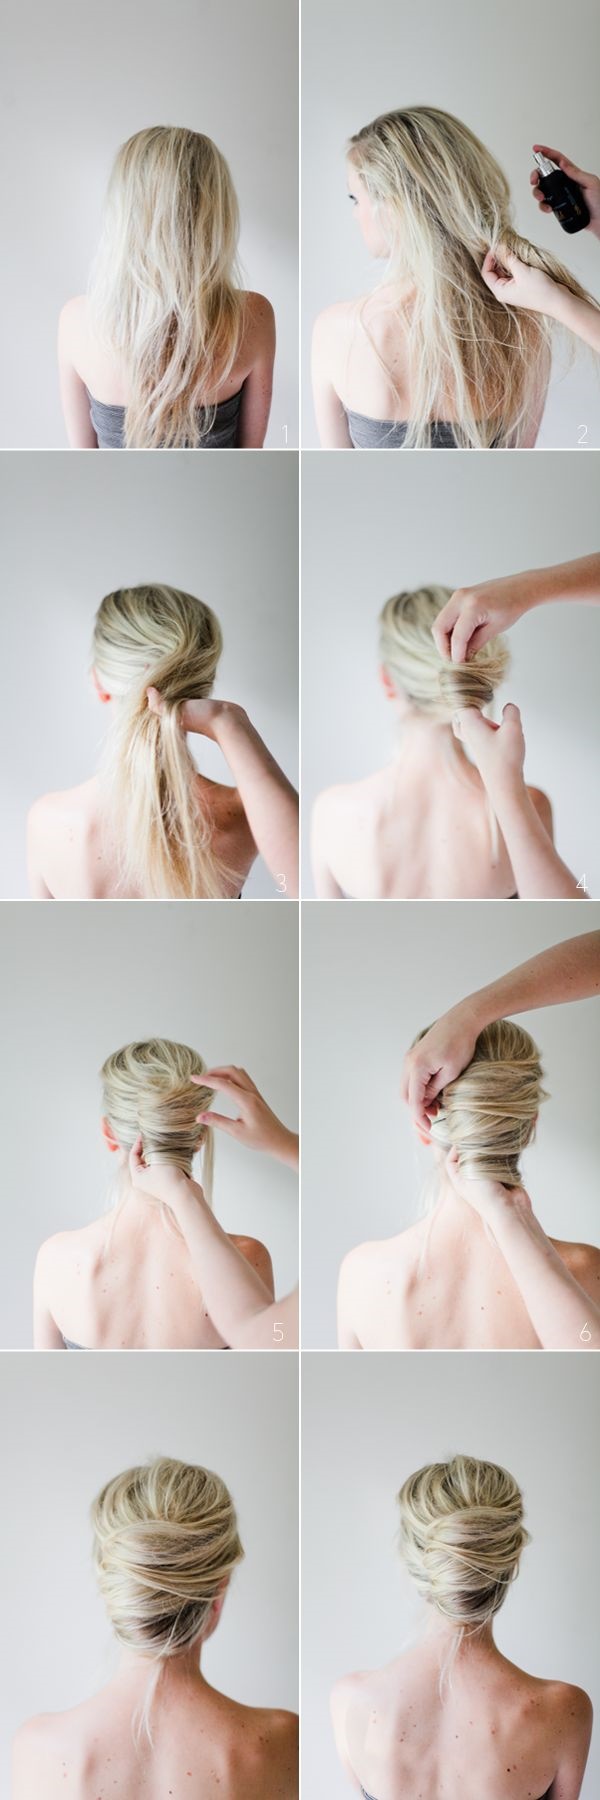 Messy Hairstyles for Long and Short Hair1 (9)